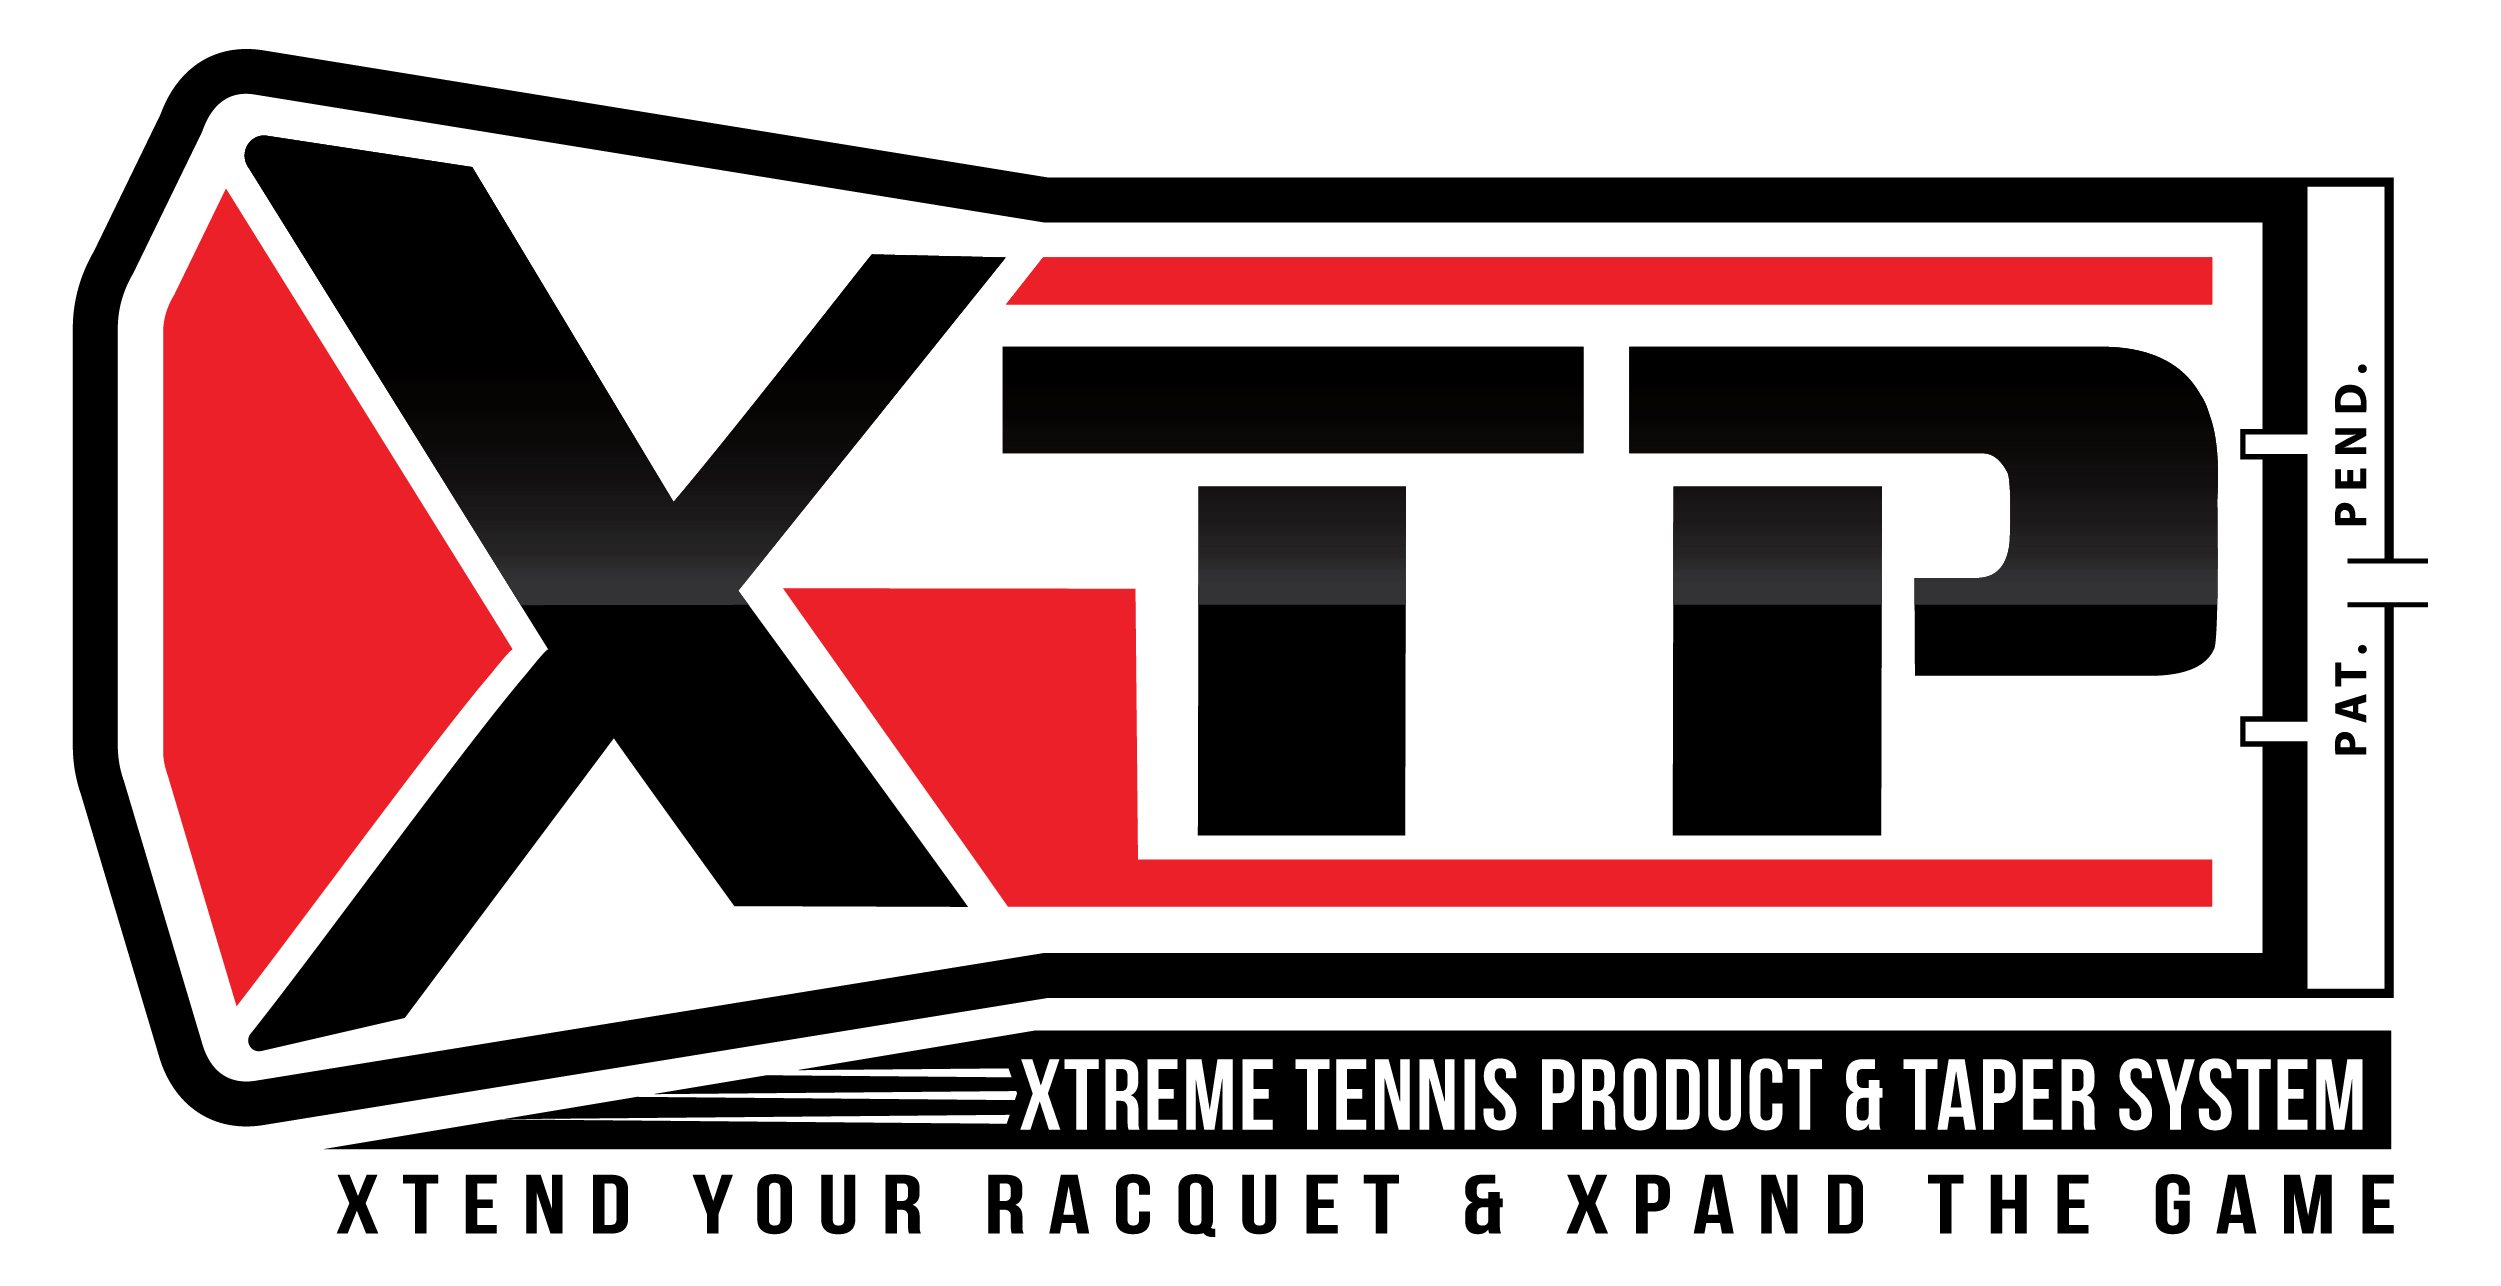 XTP tennis butt cap product gets some press in Tennis Industry Magazine.